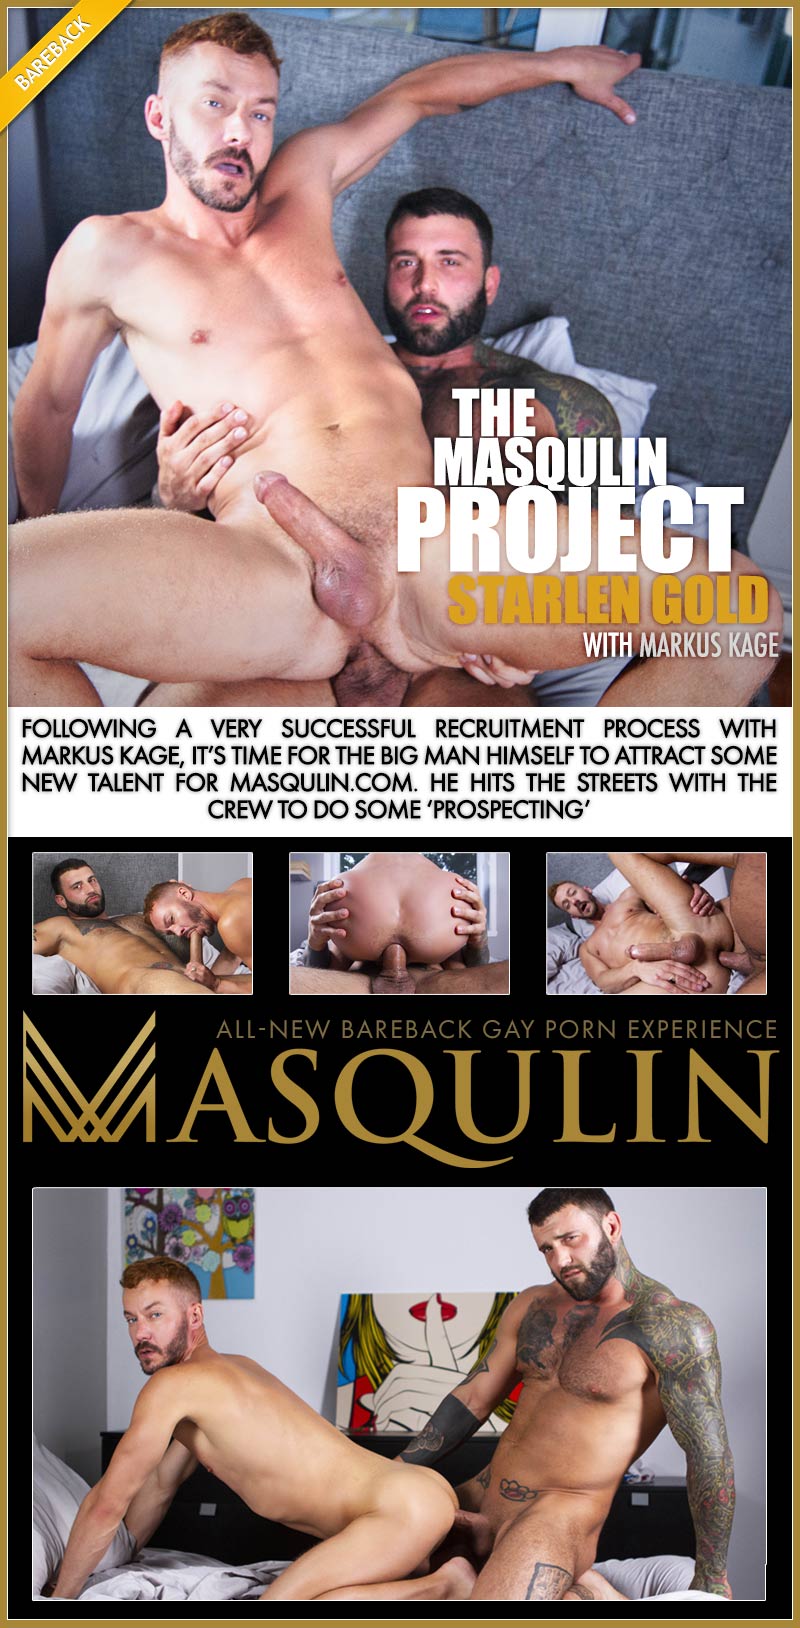 The MASQULIN Project: Starlen Gold (with Markus Kage) at MASQULIN